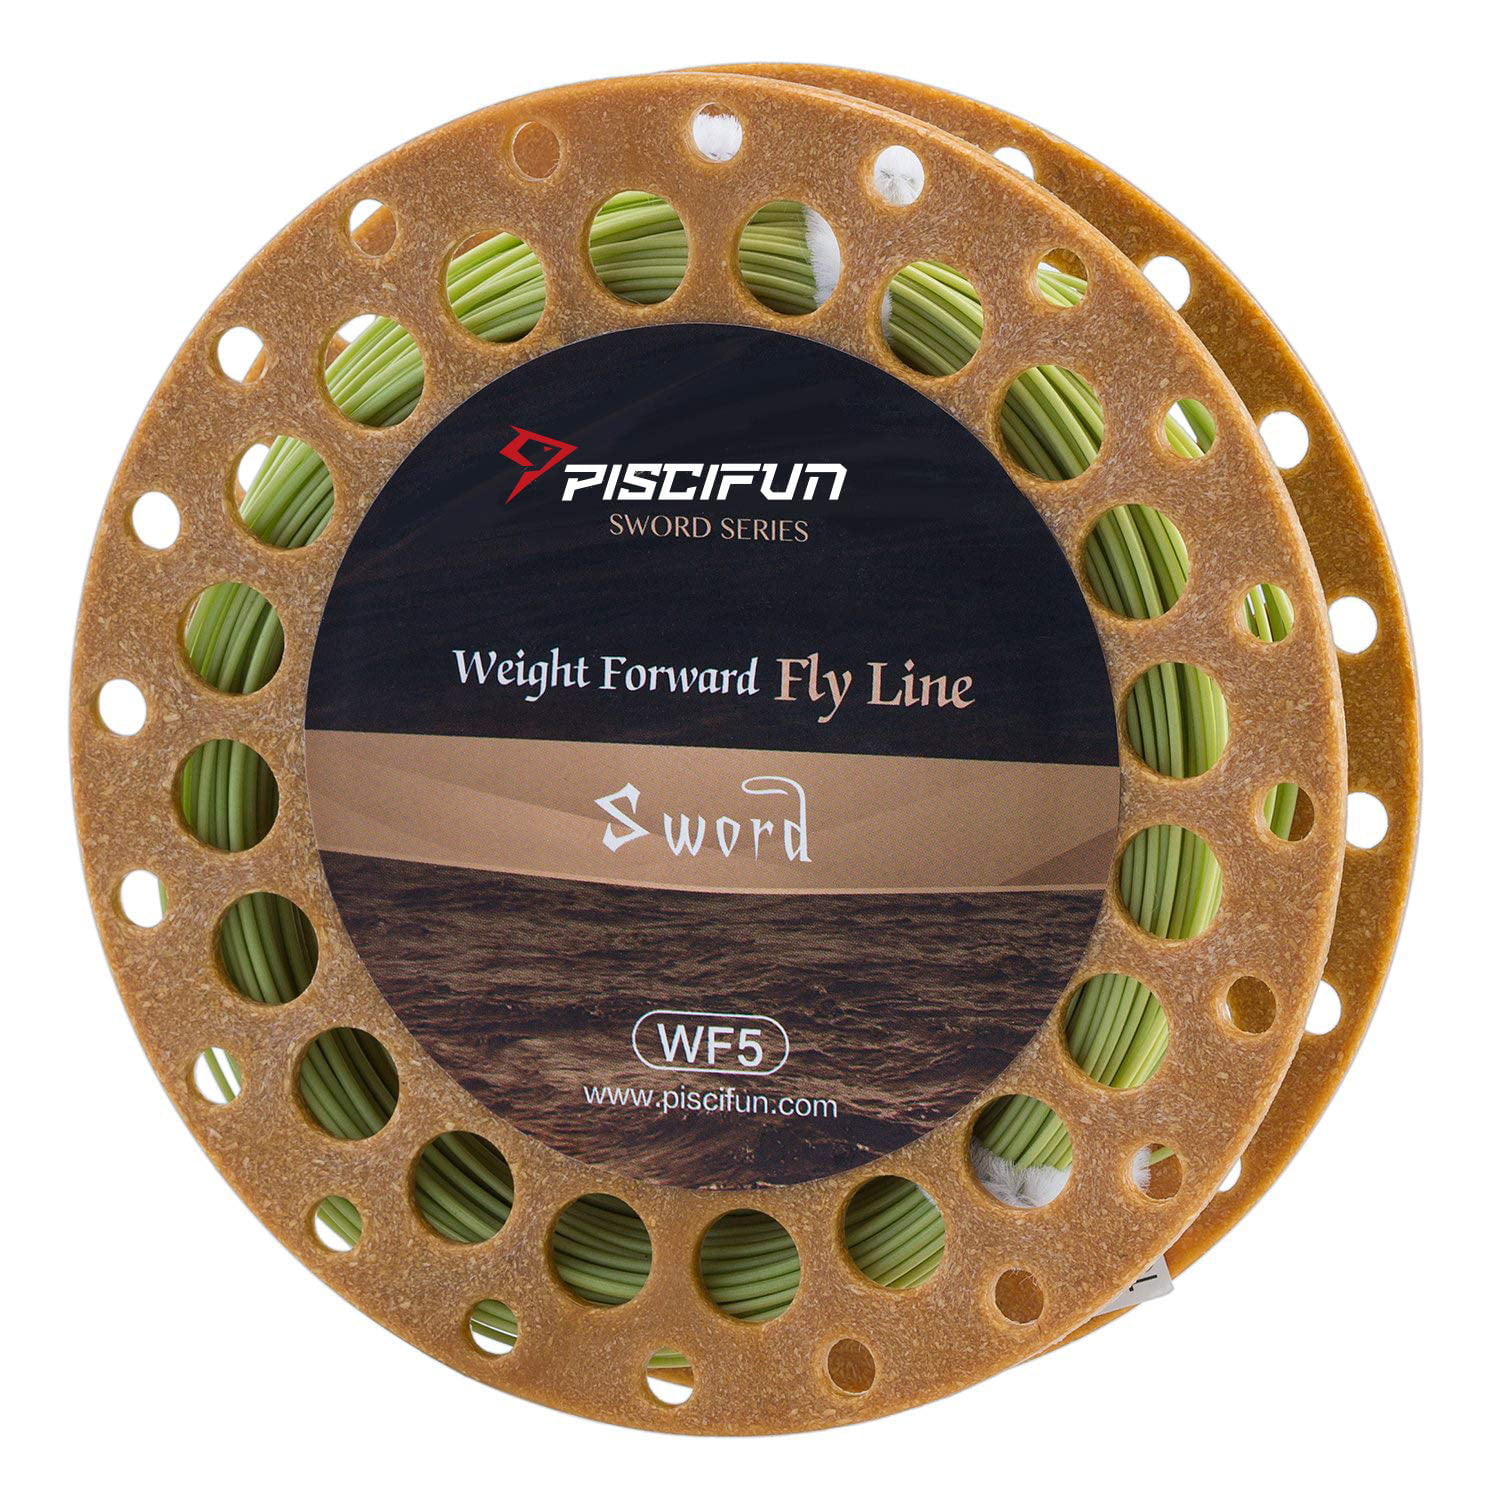 Piscifun Sword Weight Forward Floating Fly Fishing Line with